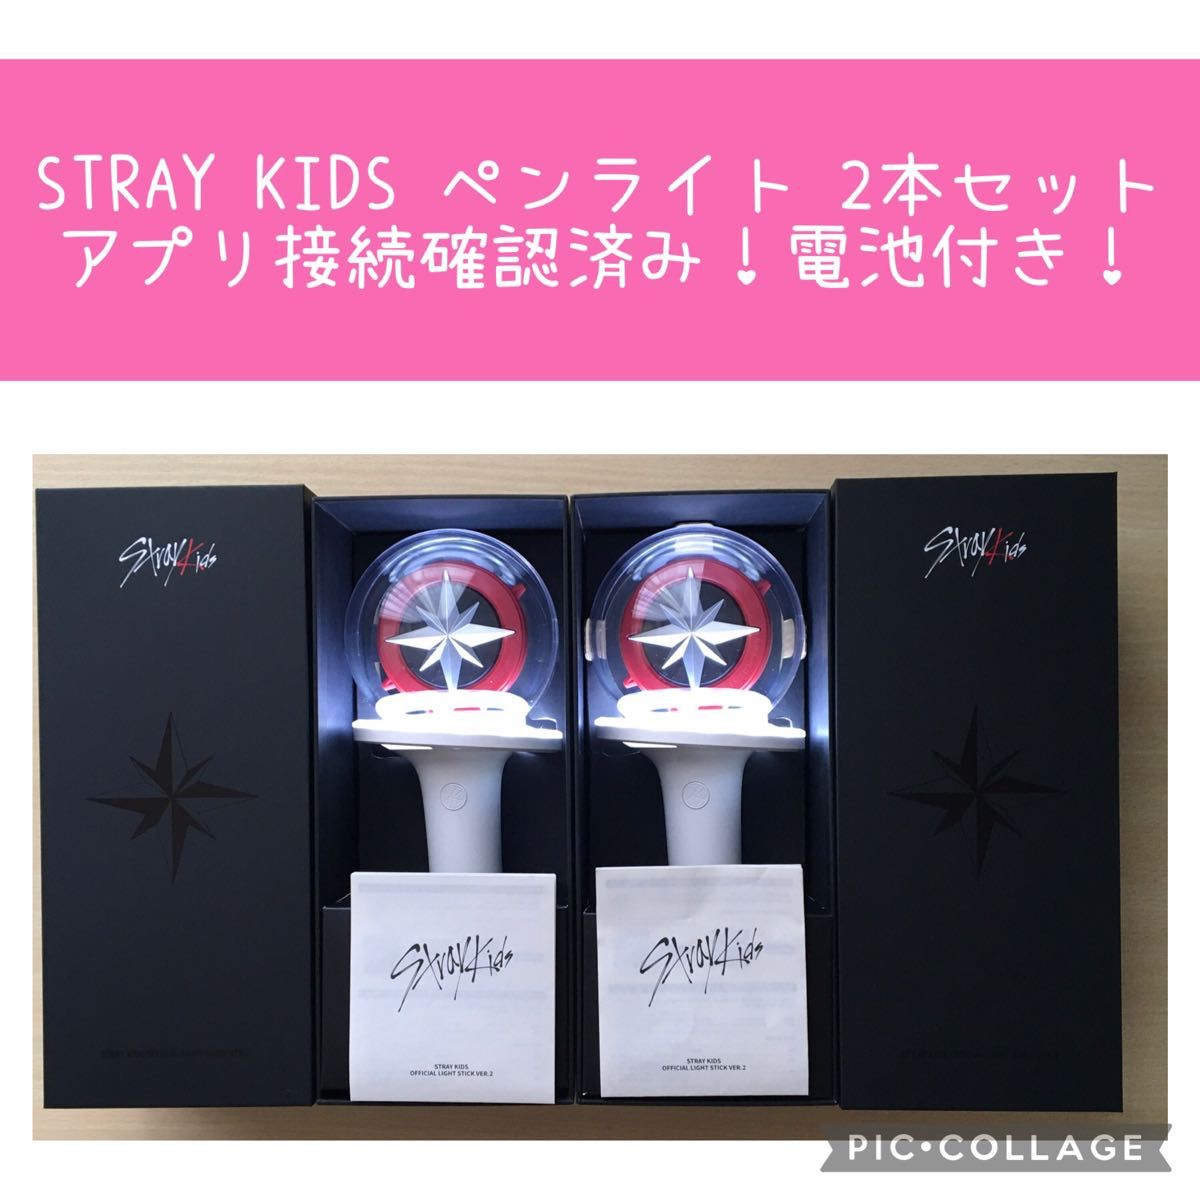 stray kids ペンライト ver.2 OFFICIAL LIGHT STICK 2本セット